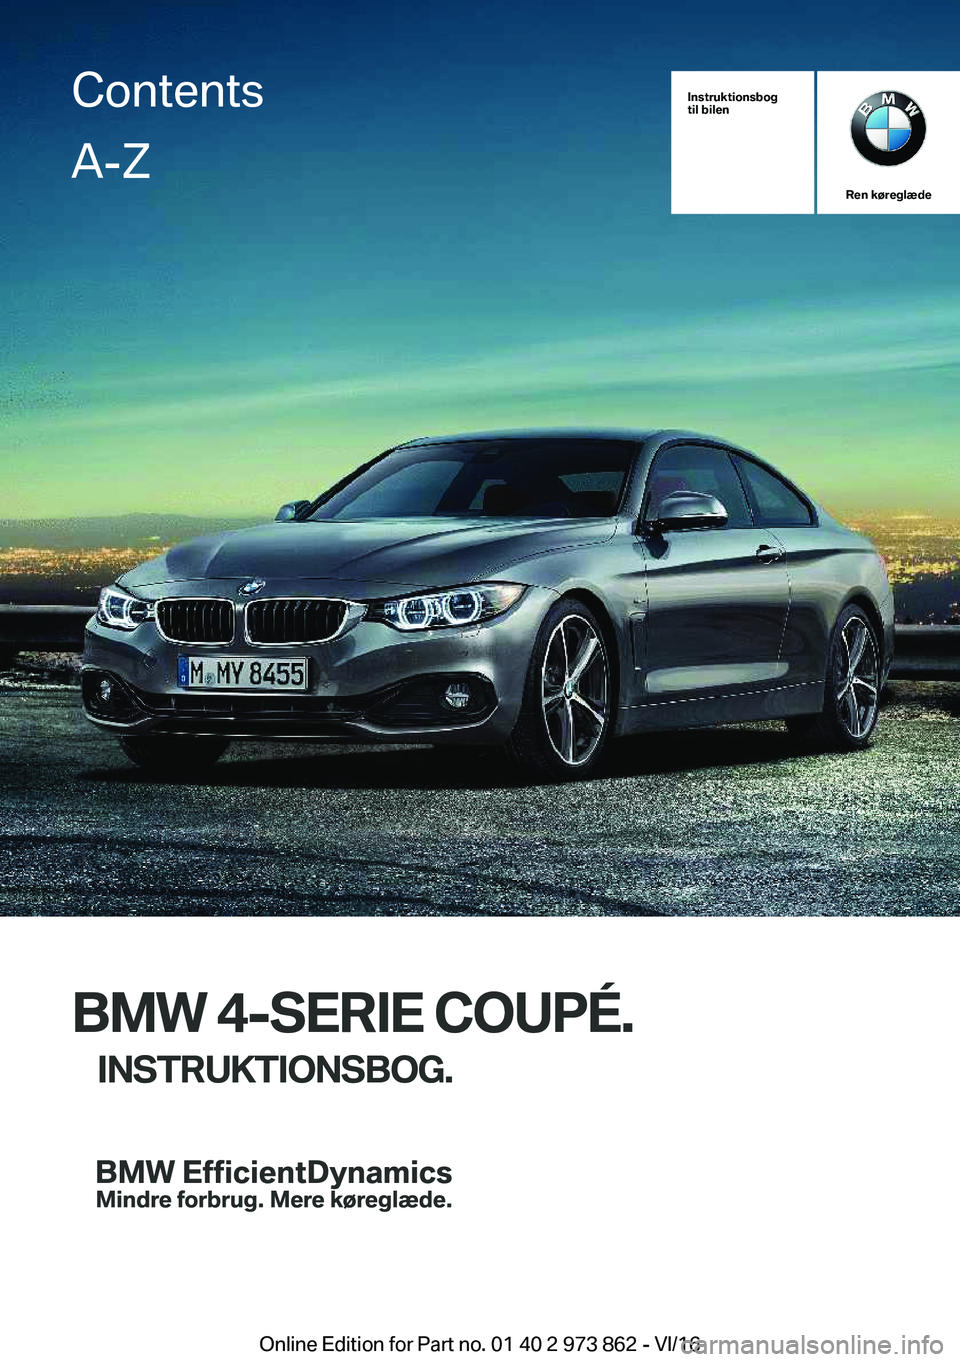 BMW 4 SERIES COUPE 2017  InstruktionsbØger (in Danish) �I�n�s�t�r�u�k�t�i�o�n�s�b�o�g
�t�i�l��b�i�l�e�n
�R�e�n��k�